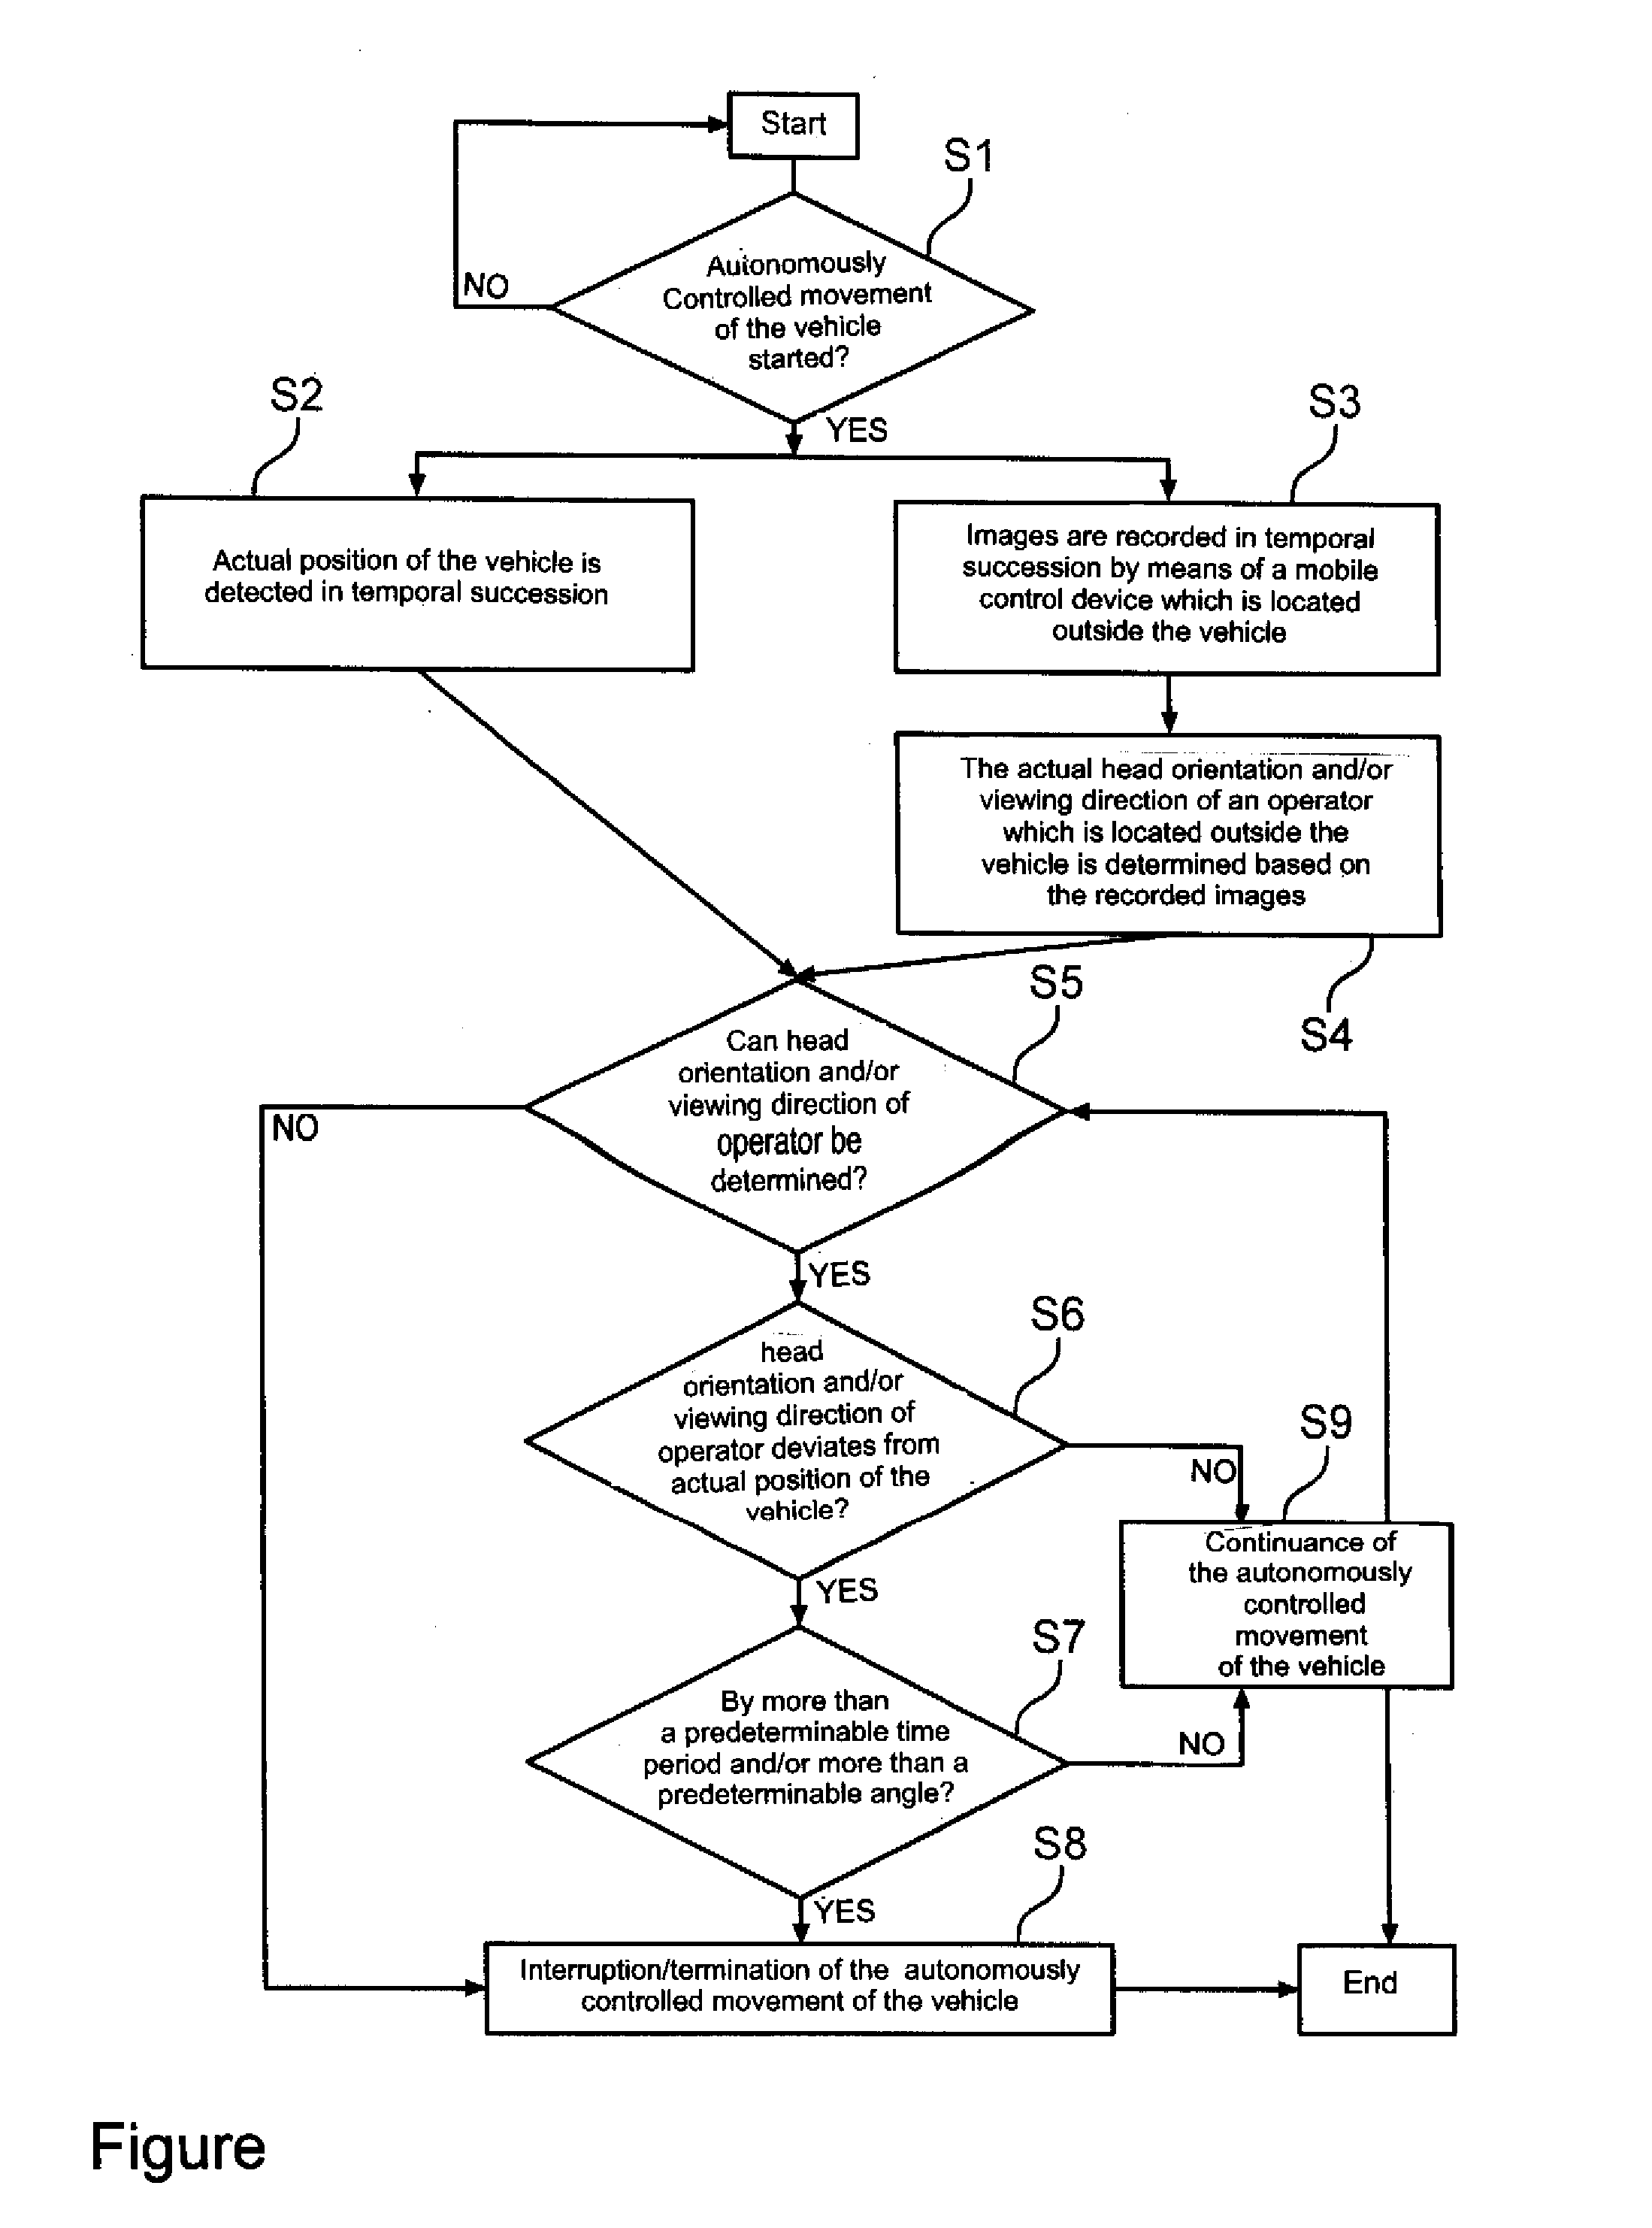 Method and system for operating a vehicle by monitoring the head orientation and/or viewing direction of an operator by means of a camera device of a mobile control device